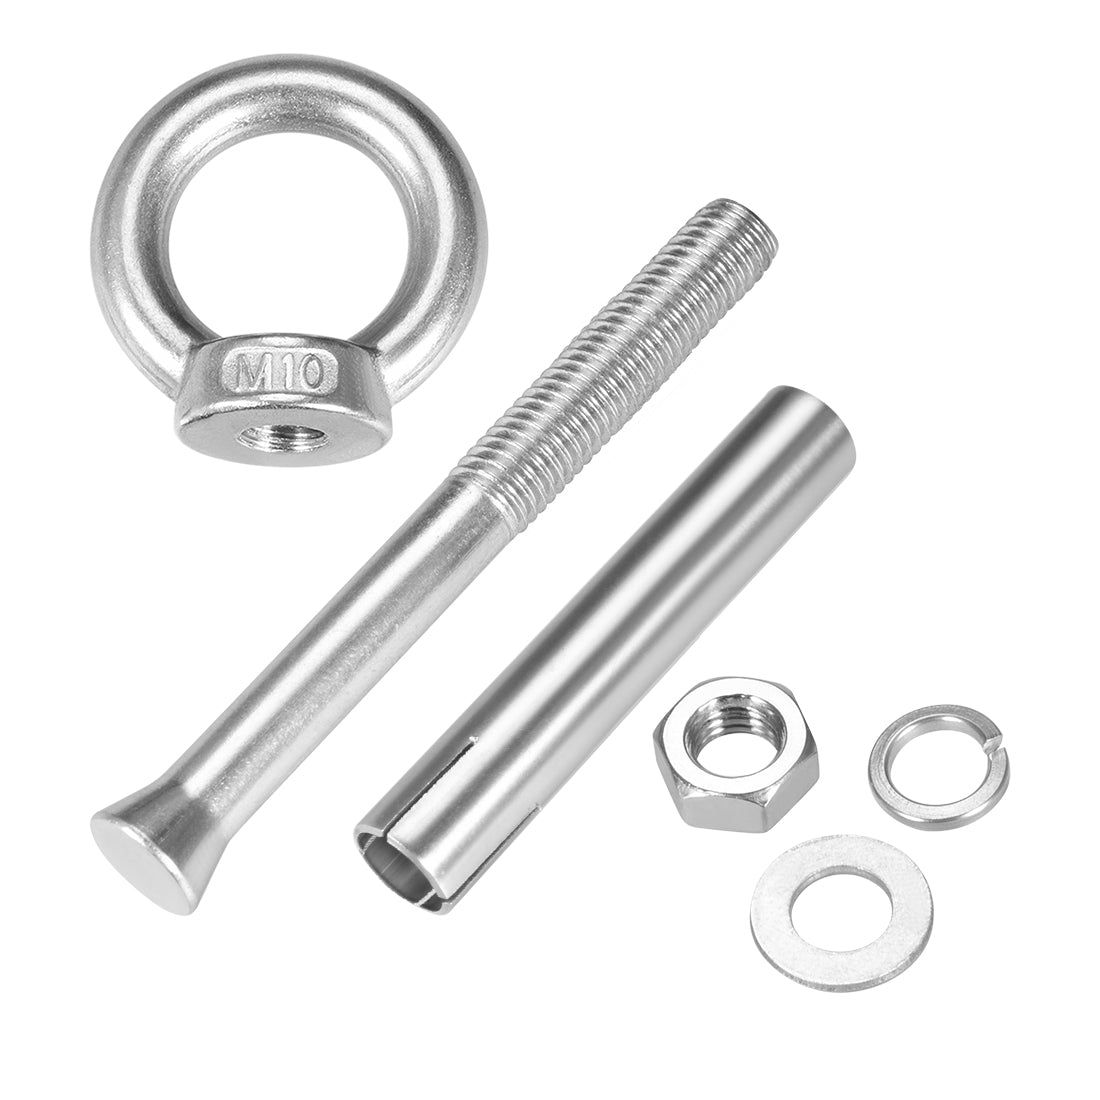 uxcell Uxcell M10 x 100 Expansion Eyebolt Eye Nut Screw with Ring Anchor Raw Bolts 1 Pcs